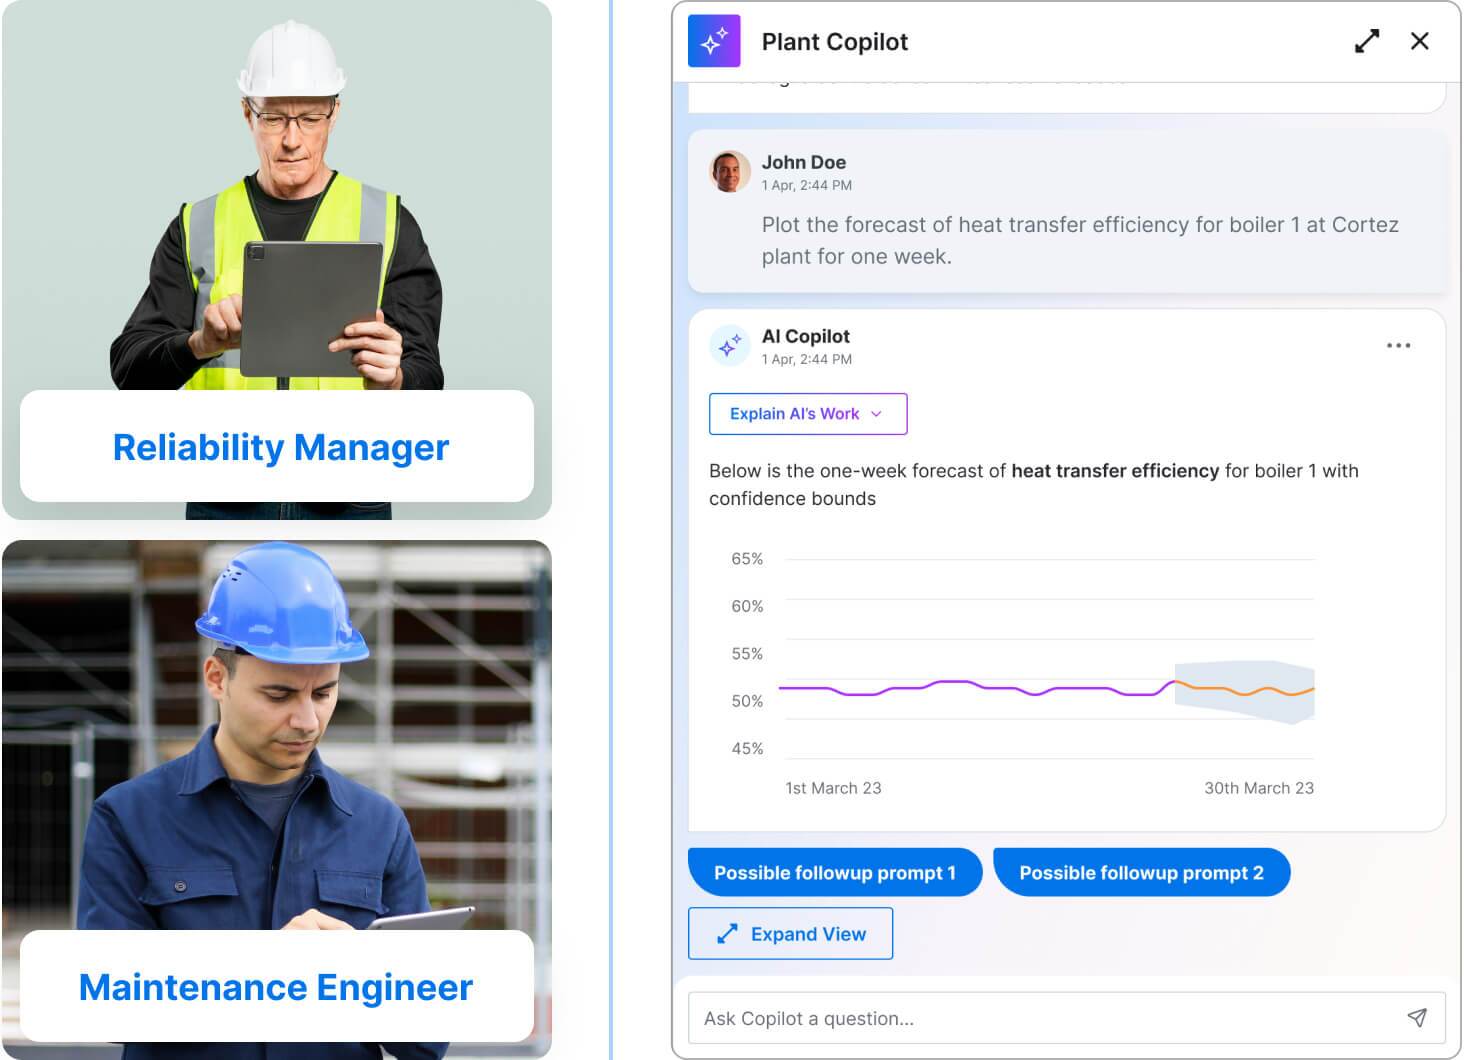 Collage of industrial workplace roles: a reliability manager using a tablet, and a maintenance engineer consulting a digital device.